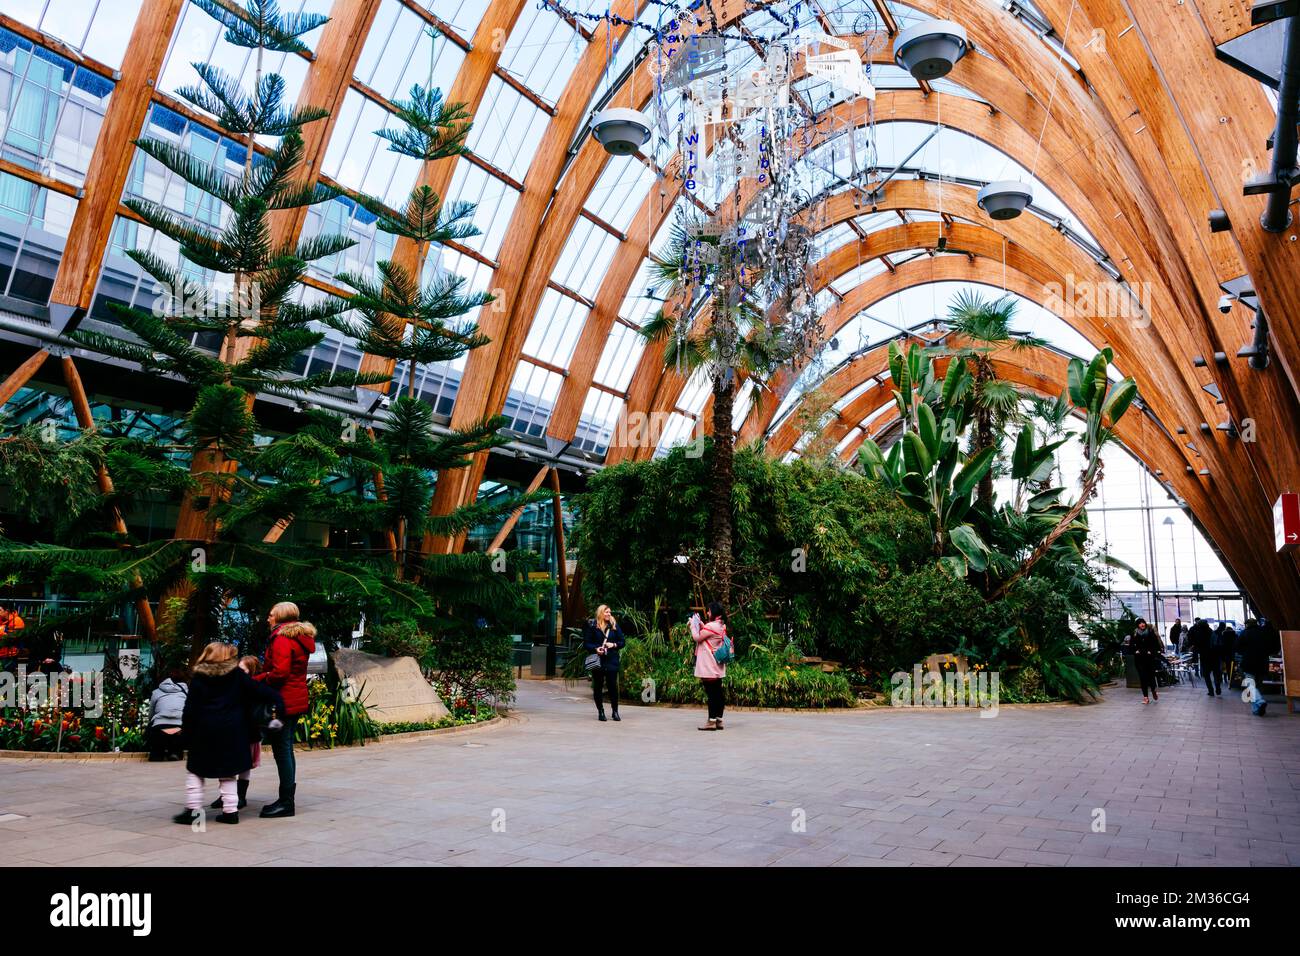 Sheffield Winter Garden is one of the largest temperate glasshouses to be built in the UK during the last hundred years, and the largest urban glassho Stock Photo